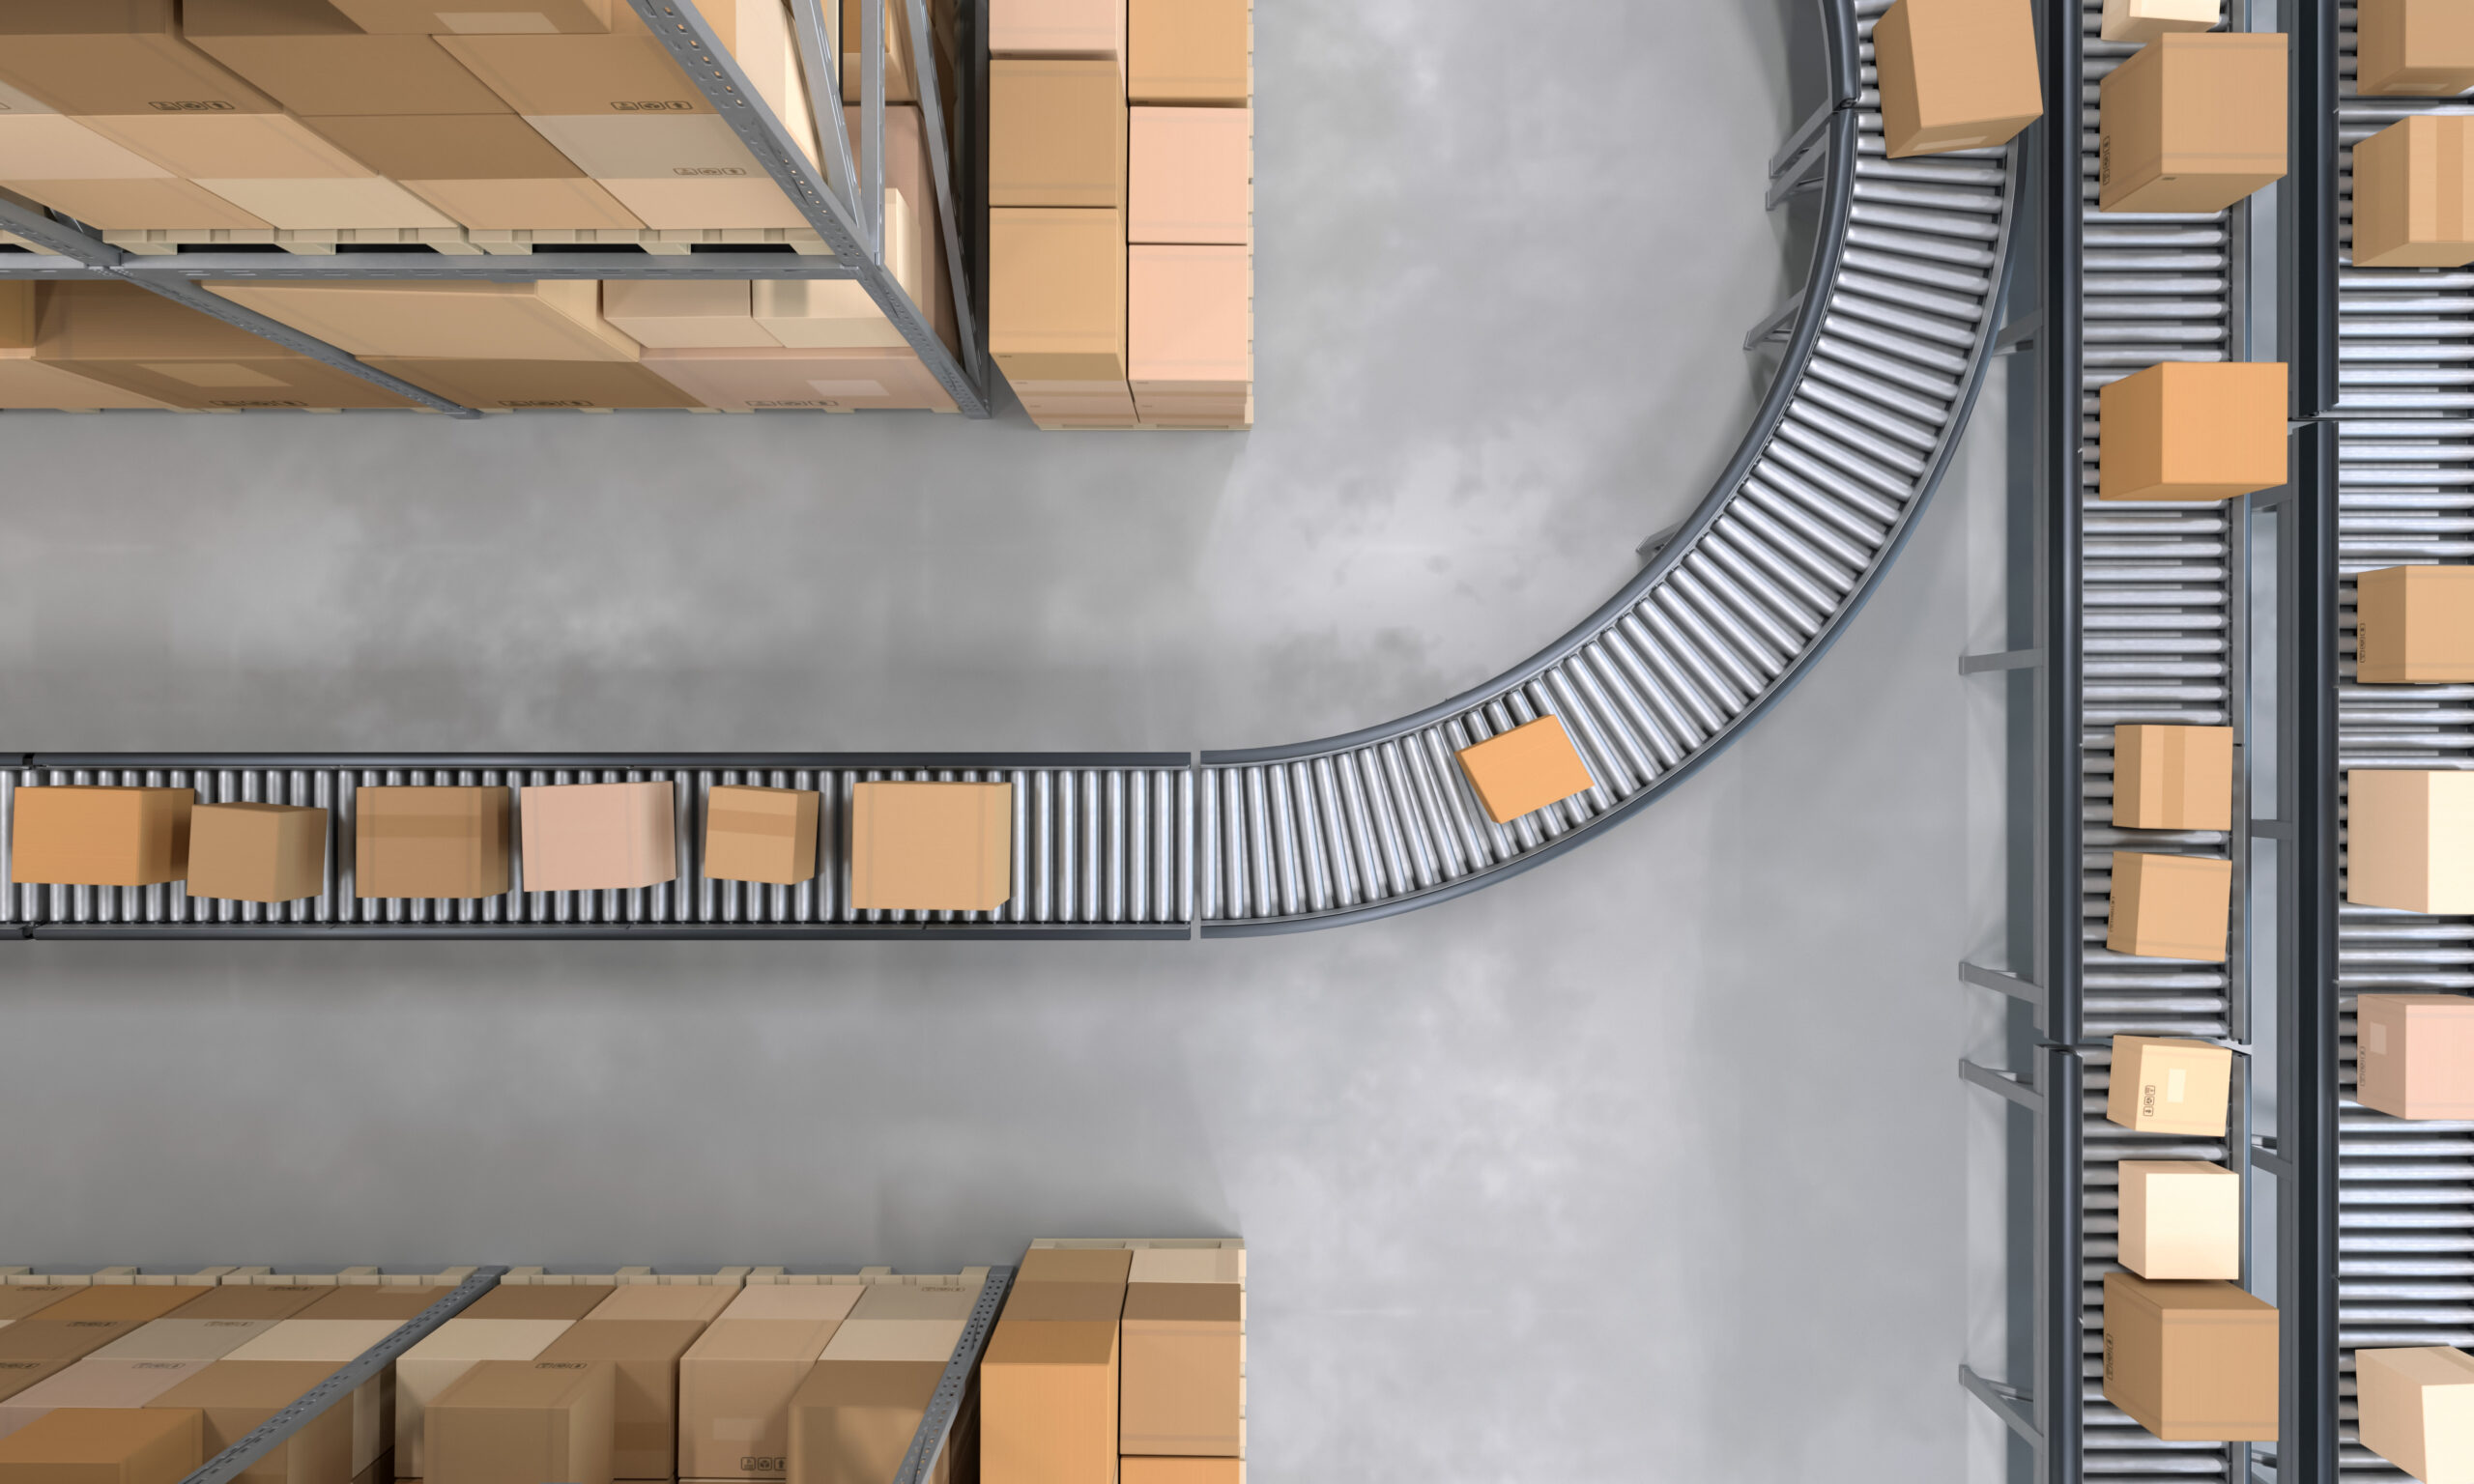 Top view of conveyor belts transporting boxes